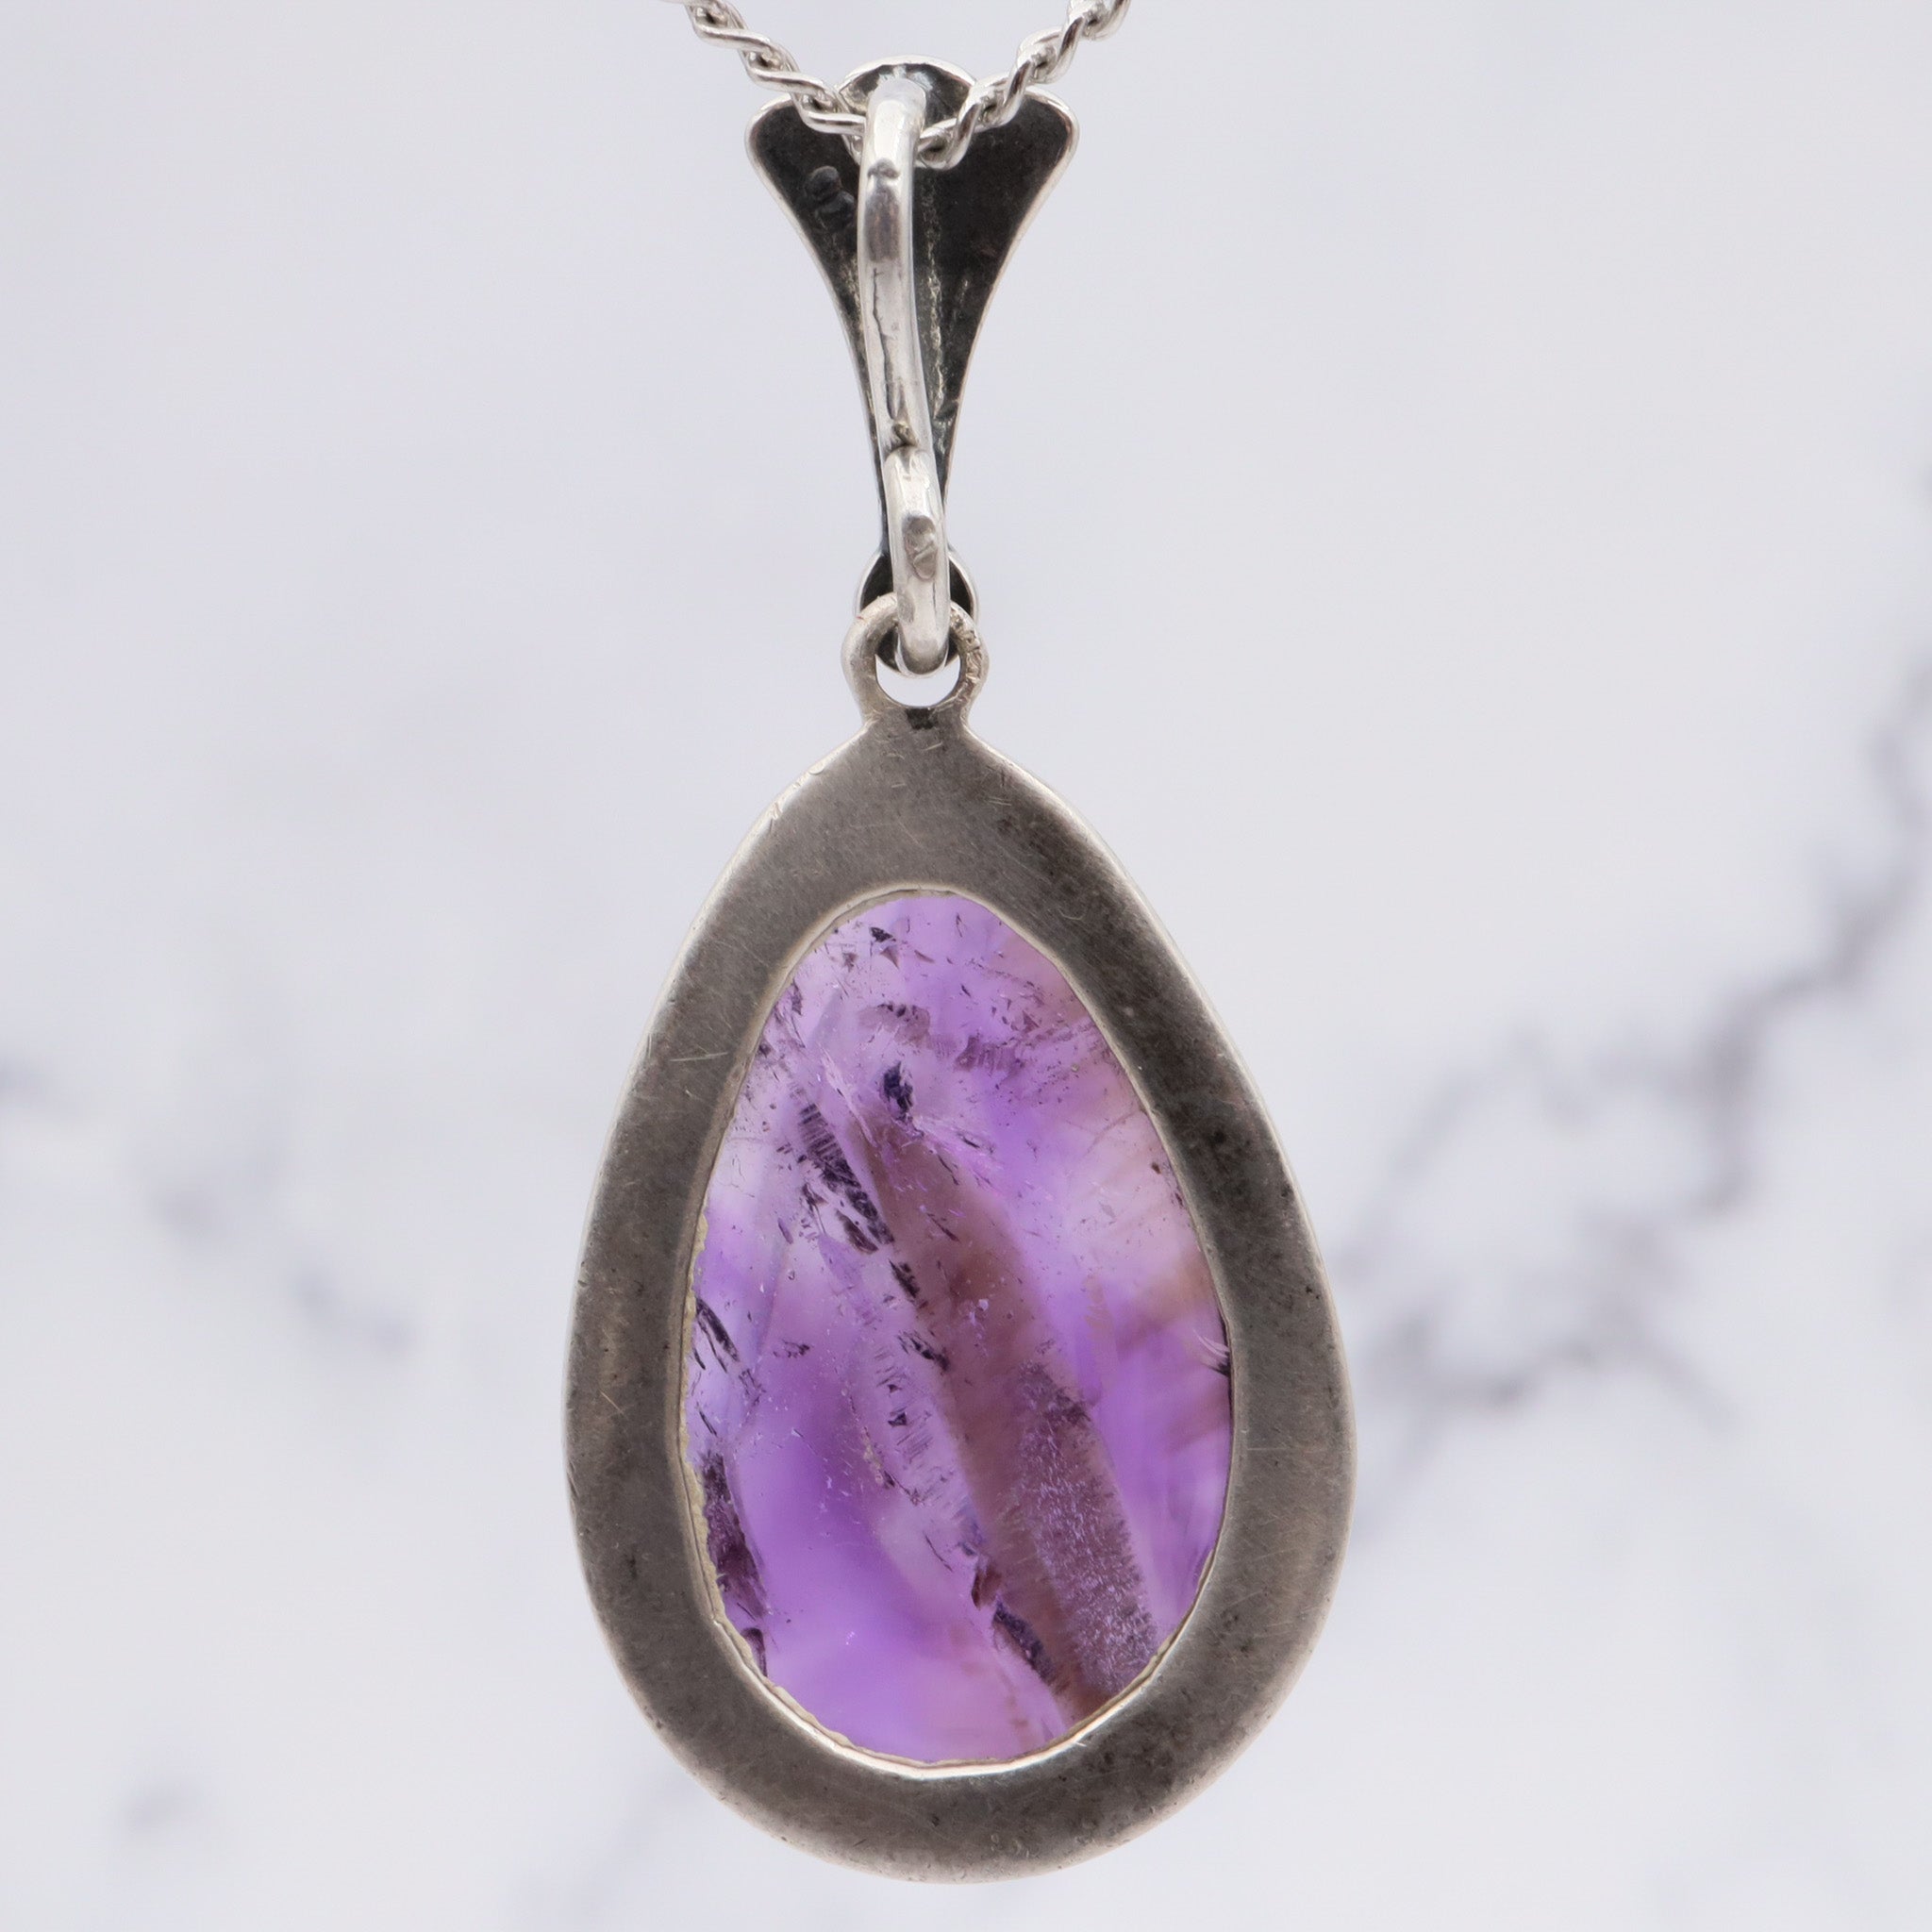 Antique sterling silver and amethyst tear drop pendant